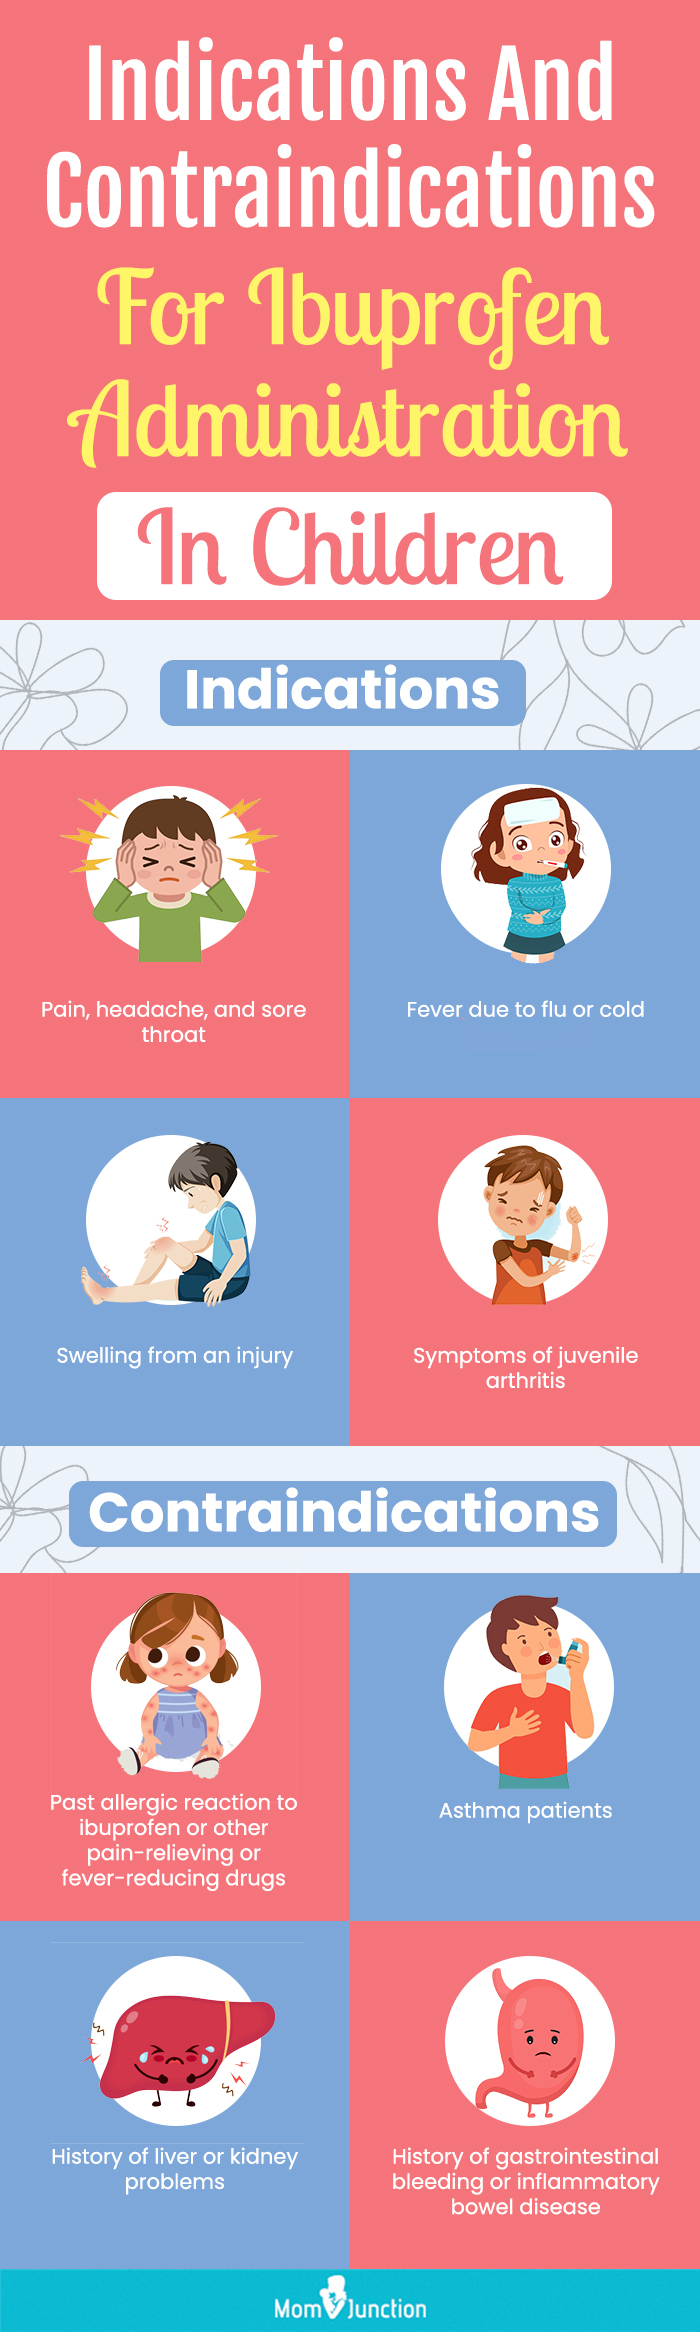 indications and contraindications for ibuprofen administration in children (infographic)